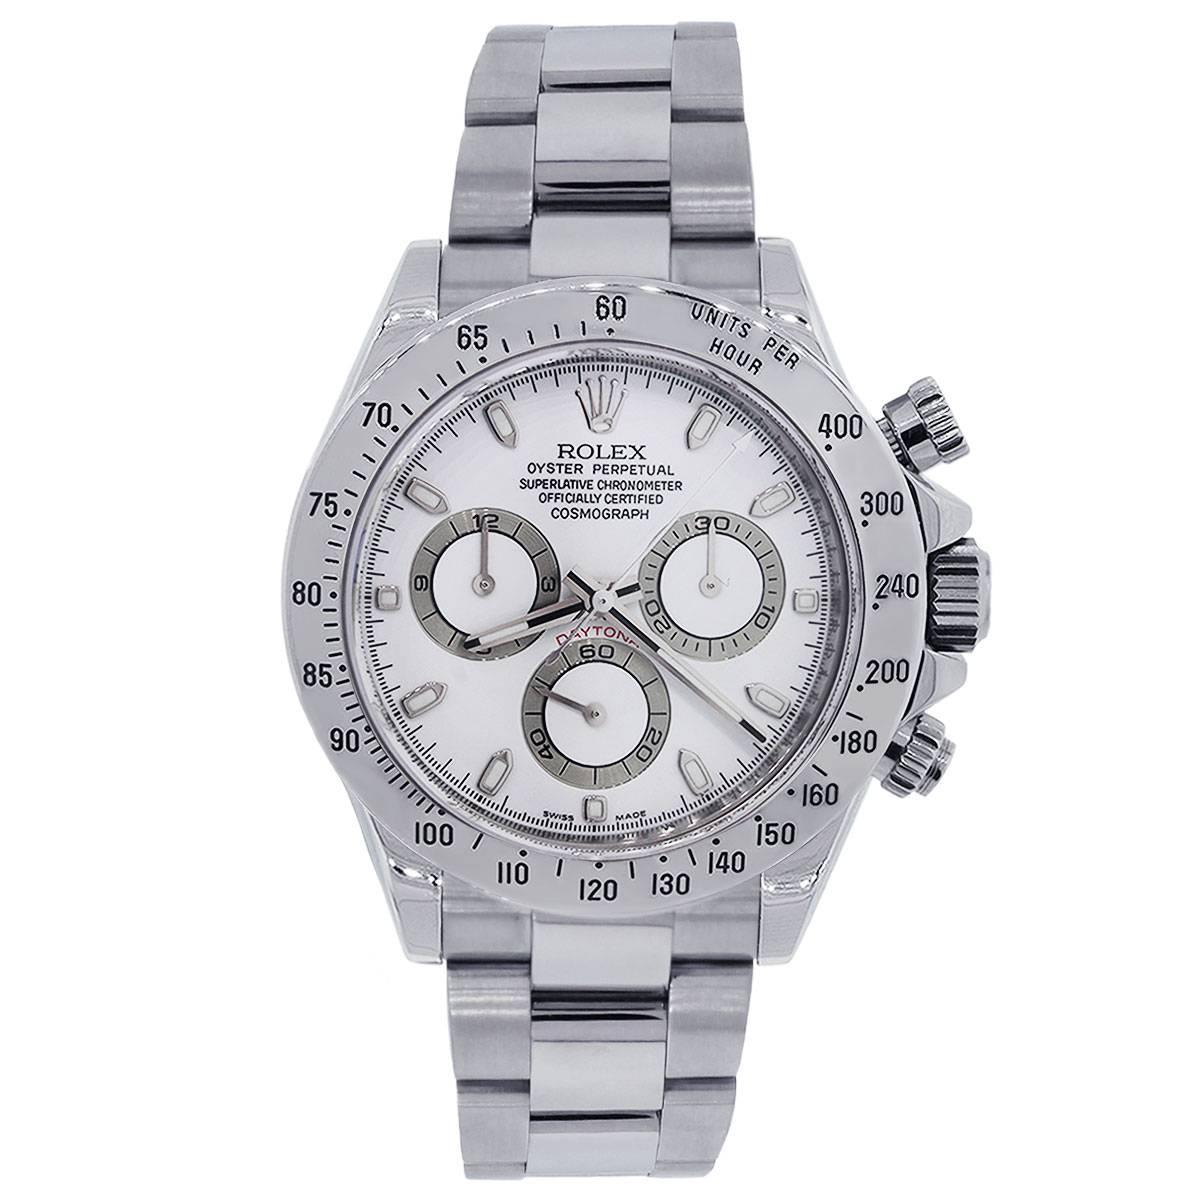 Brand: Rolex
MPN: 116520
Model: Daytona
Case Material: Stainless Steel
Case Diameter: 40mm
Crystal : Sapphire crystal
Bezel: Fixed stainless steel with engraved Tachymeter
Dial: White Chronograph Dial with 3 sub dials, silver luminescent